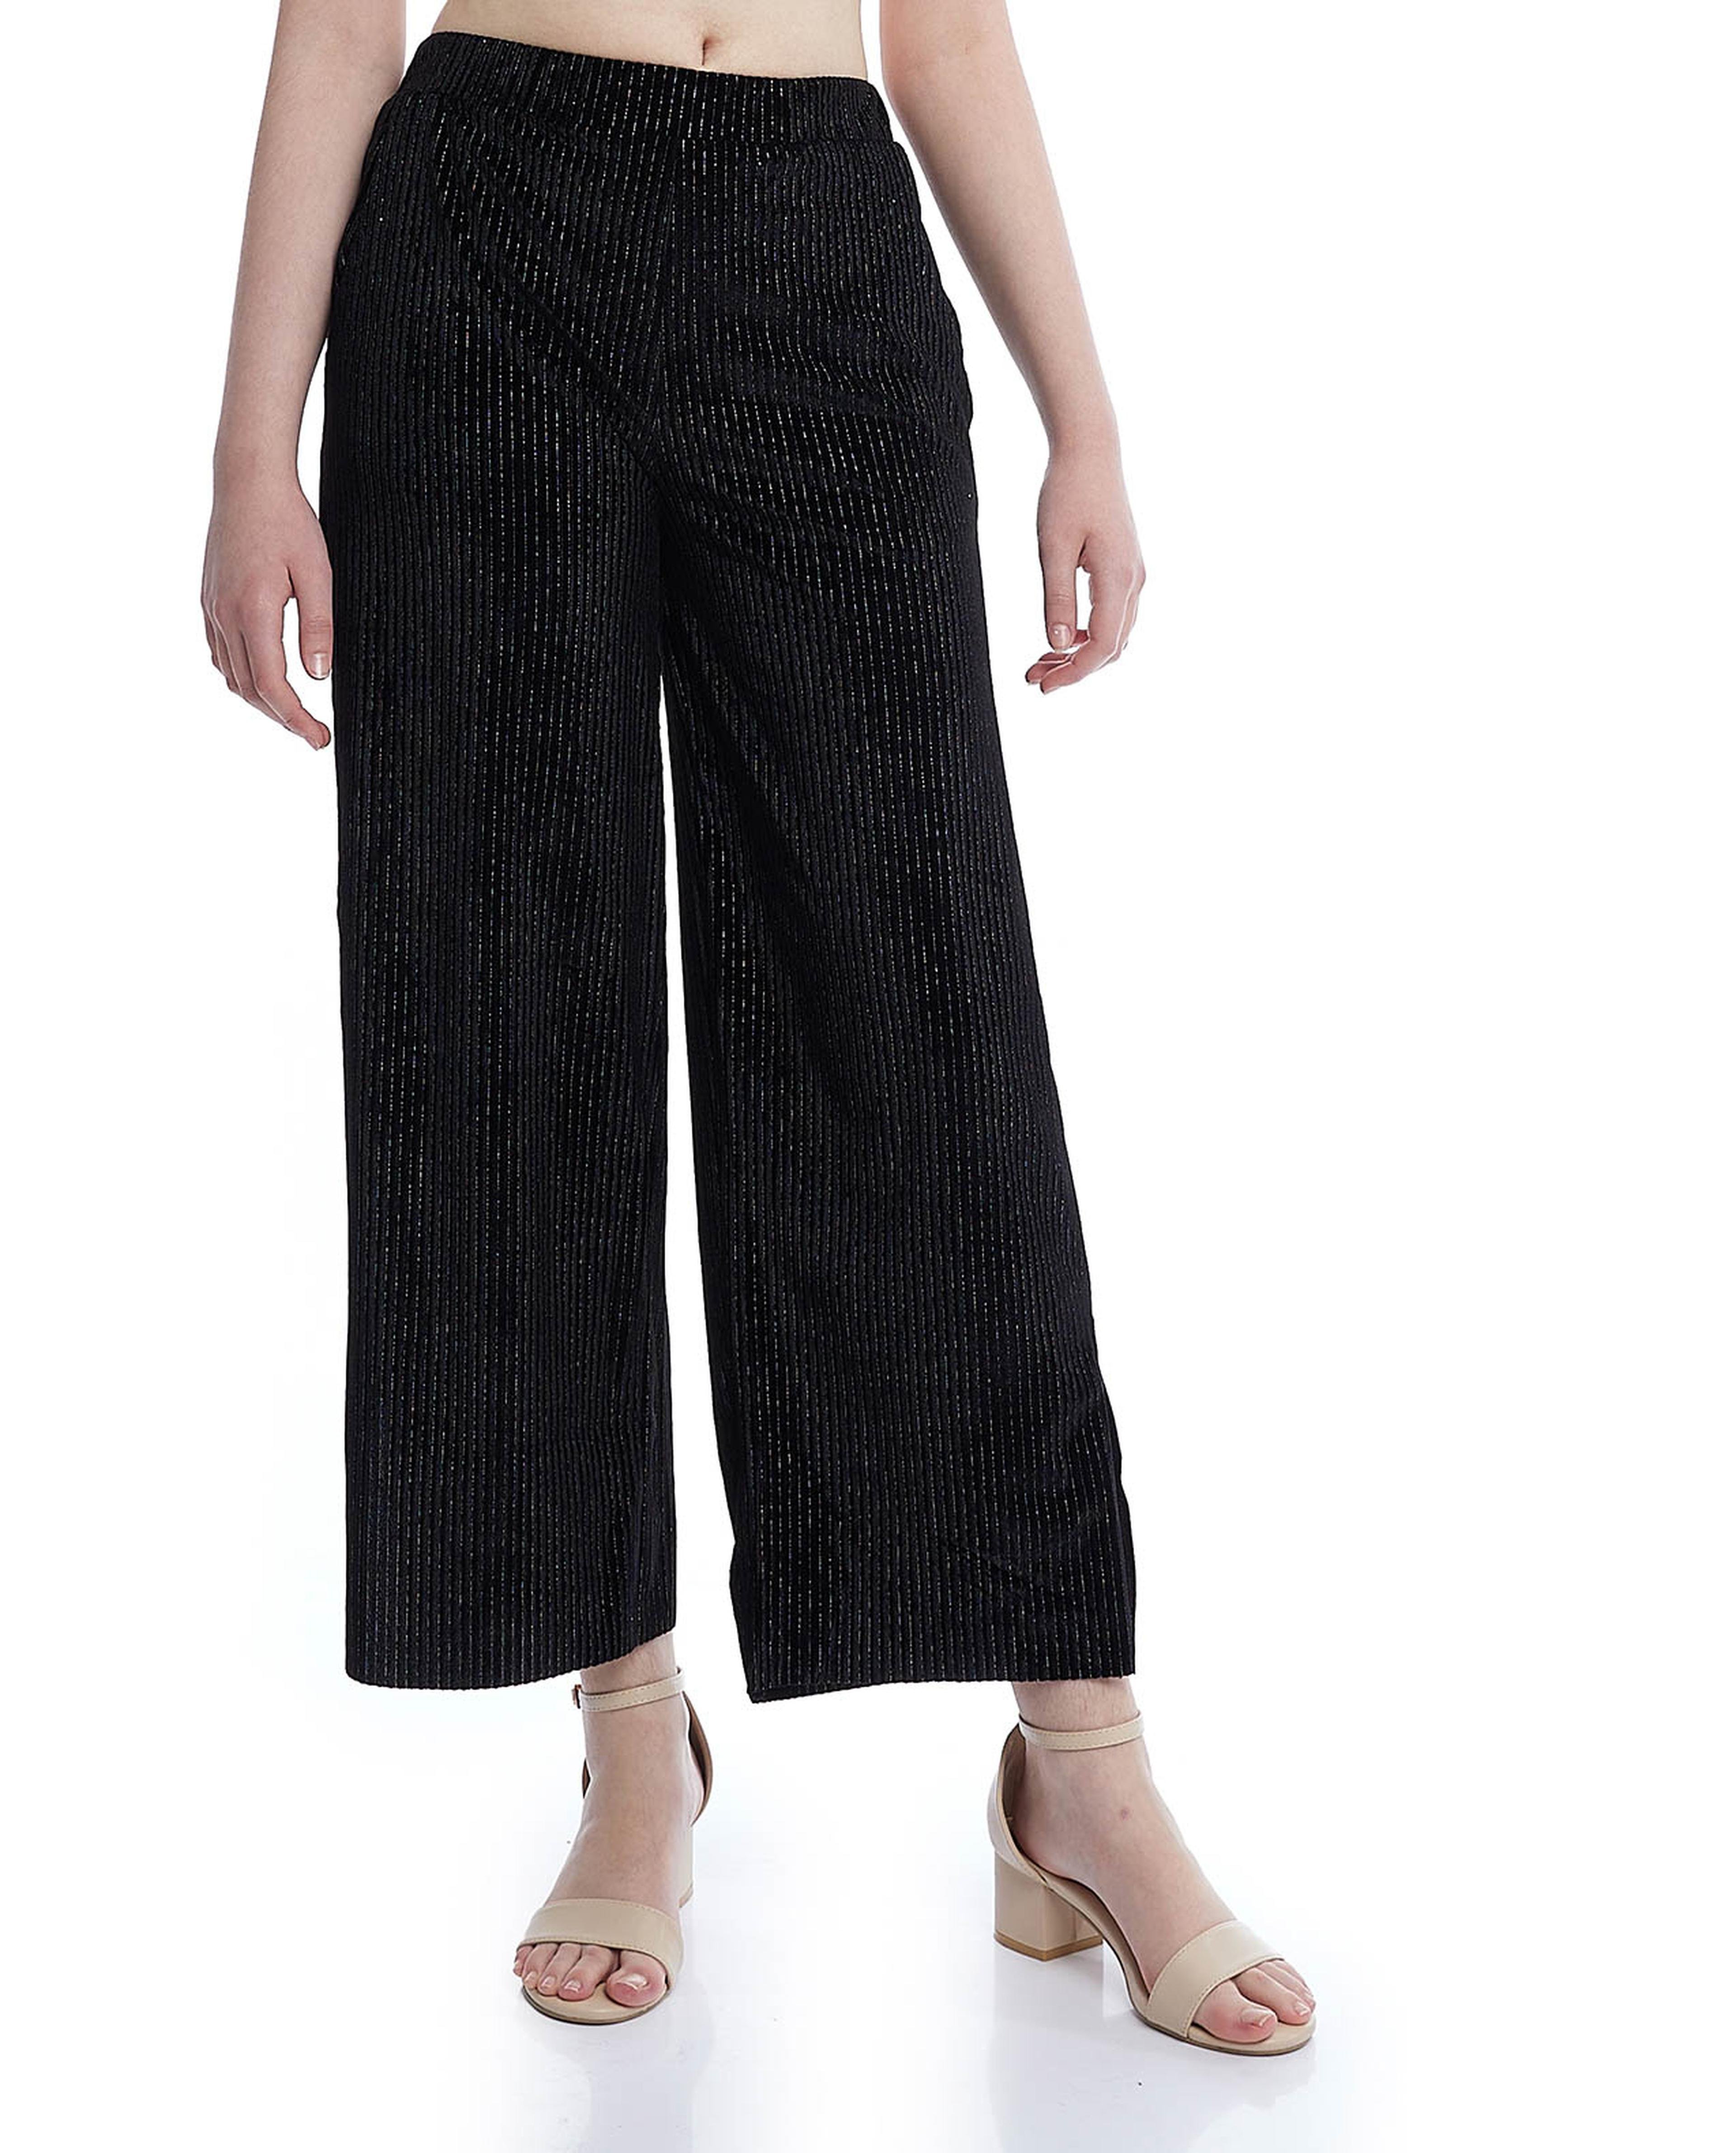 Striped Wide Leg Pants with Elastic Waist